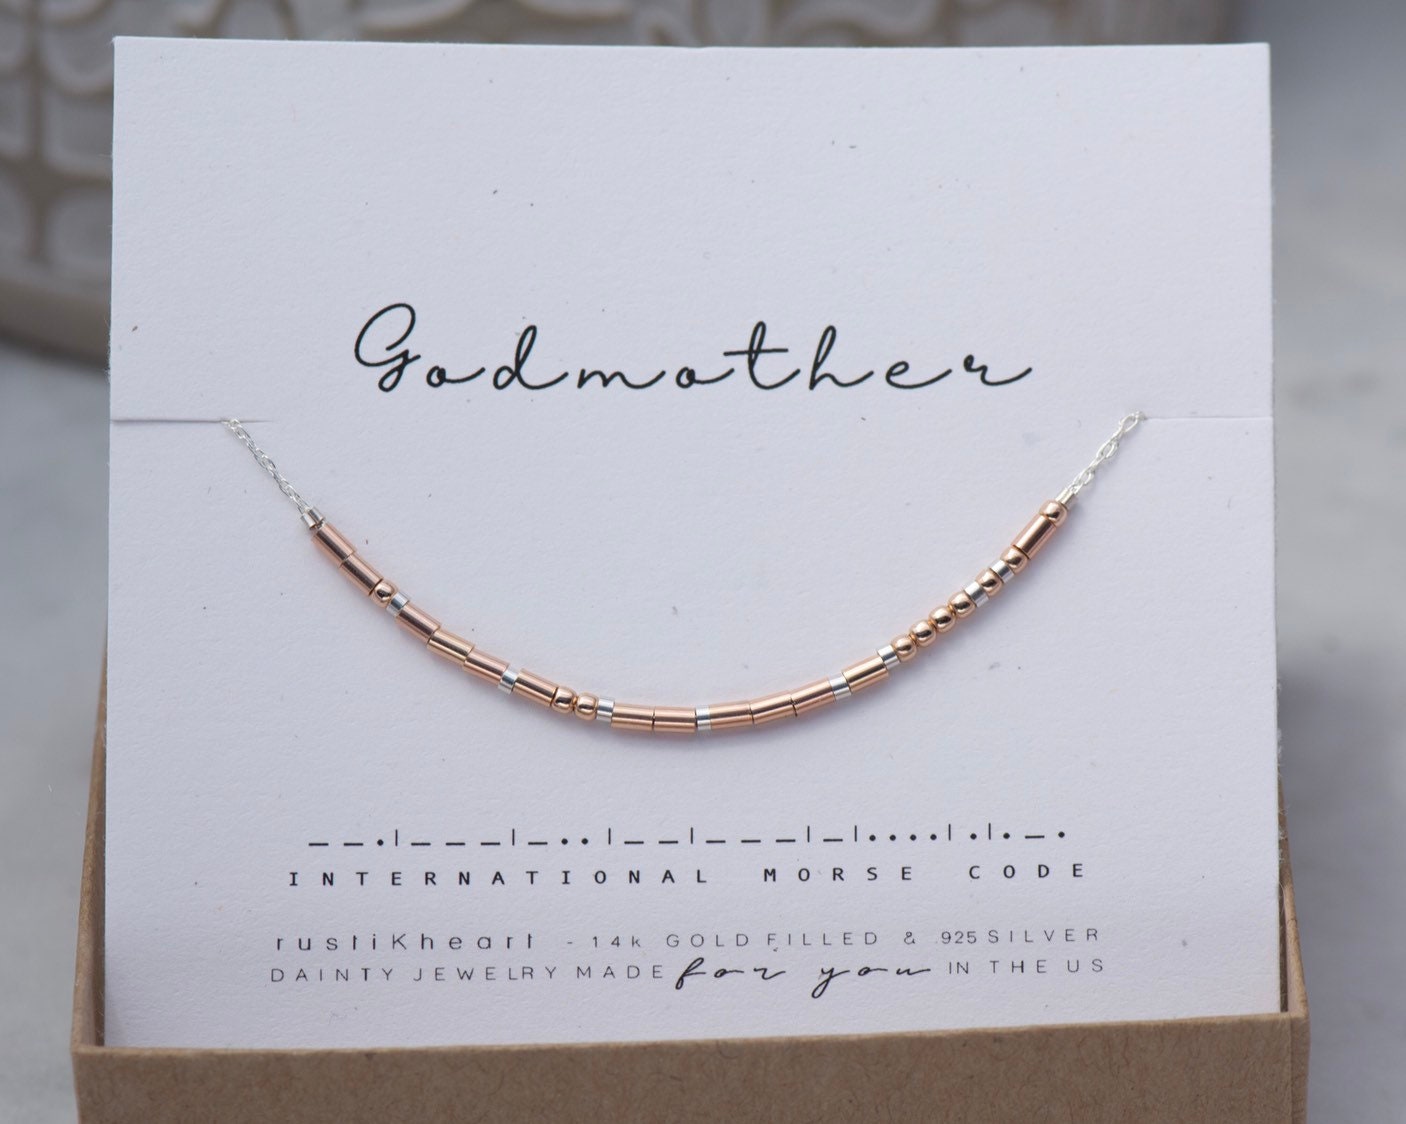 Gold Will You Be My Godmother Godmother Proposal Godmother Morse Code Necklace 18 Inch • Godmother Gift God Mothers Gift Godmother Gifts From Godchild Godmother Necklace Baptism Jewelry 